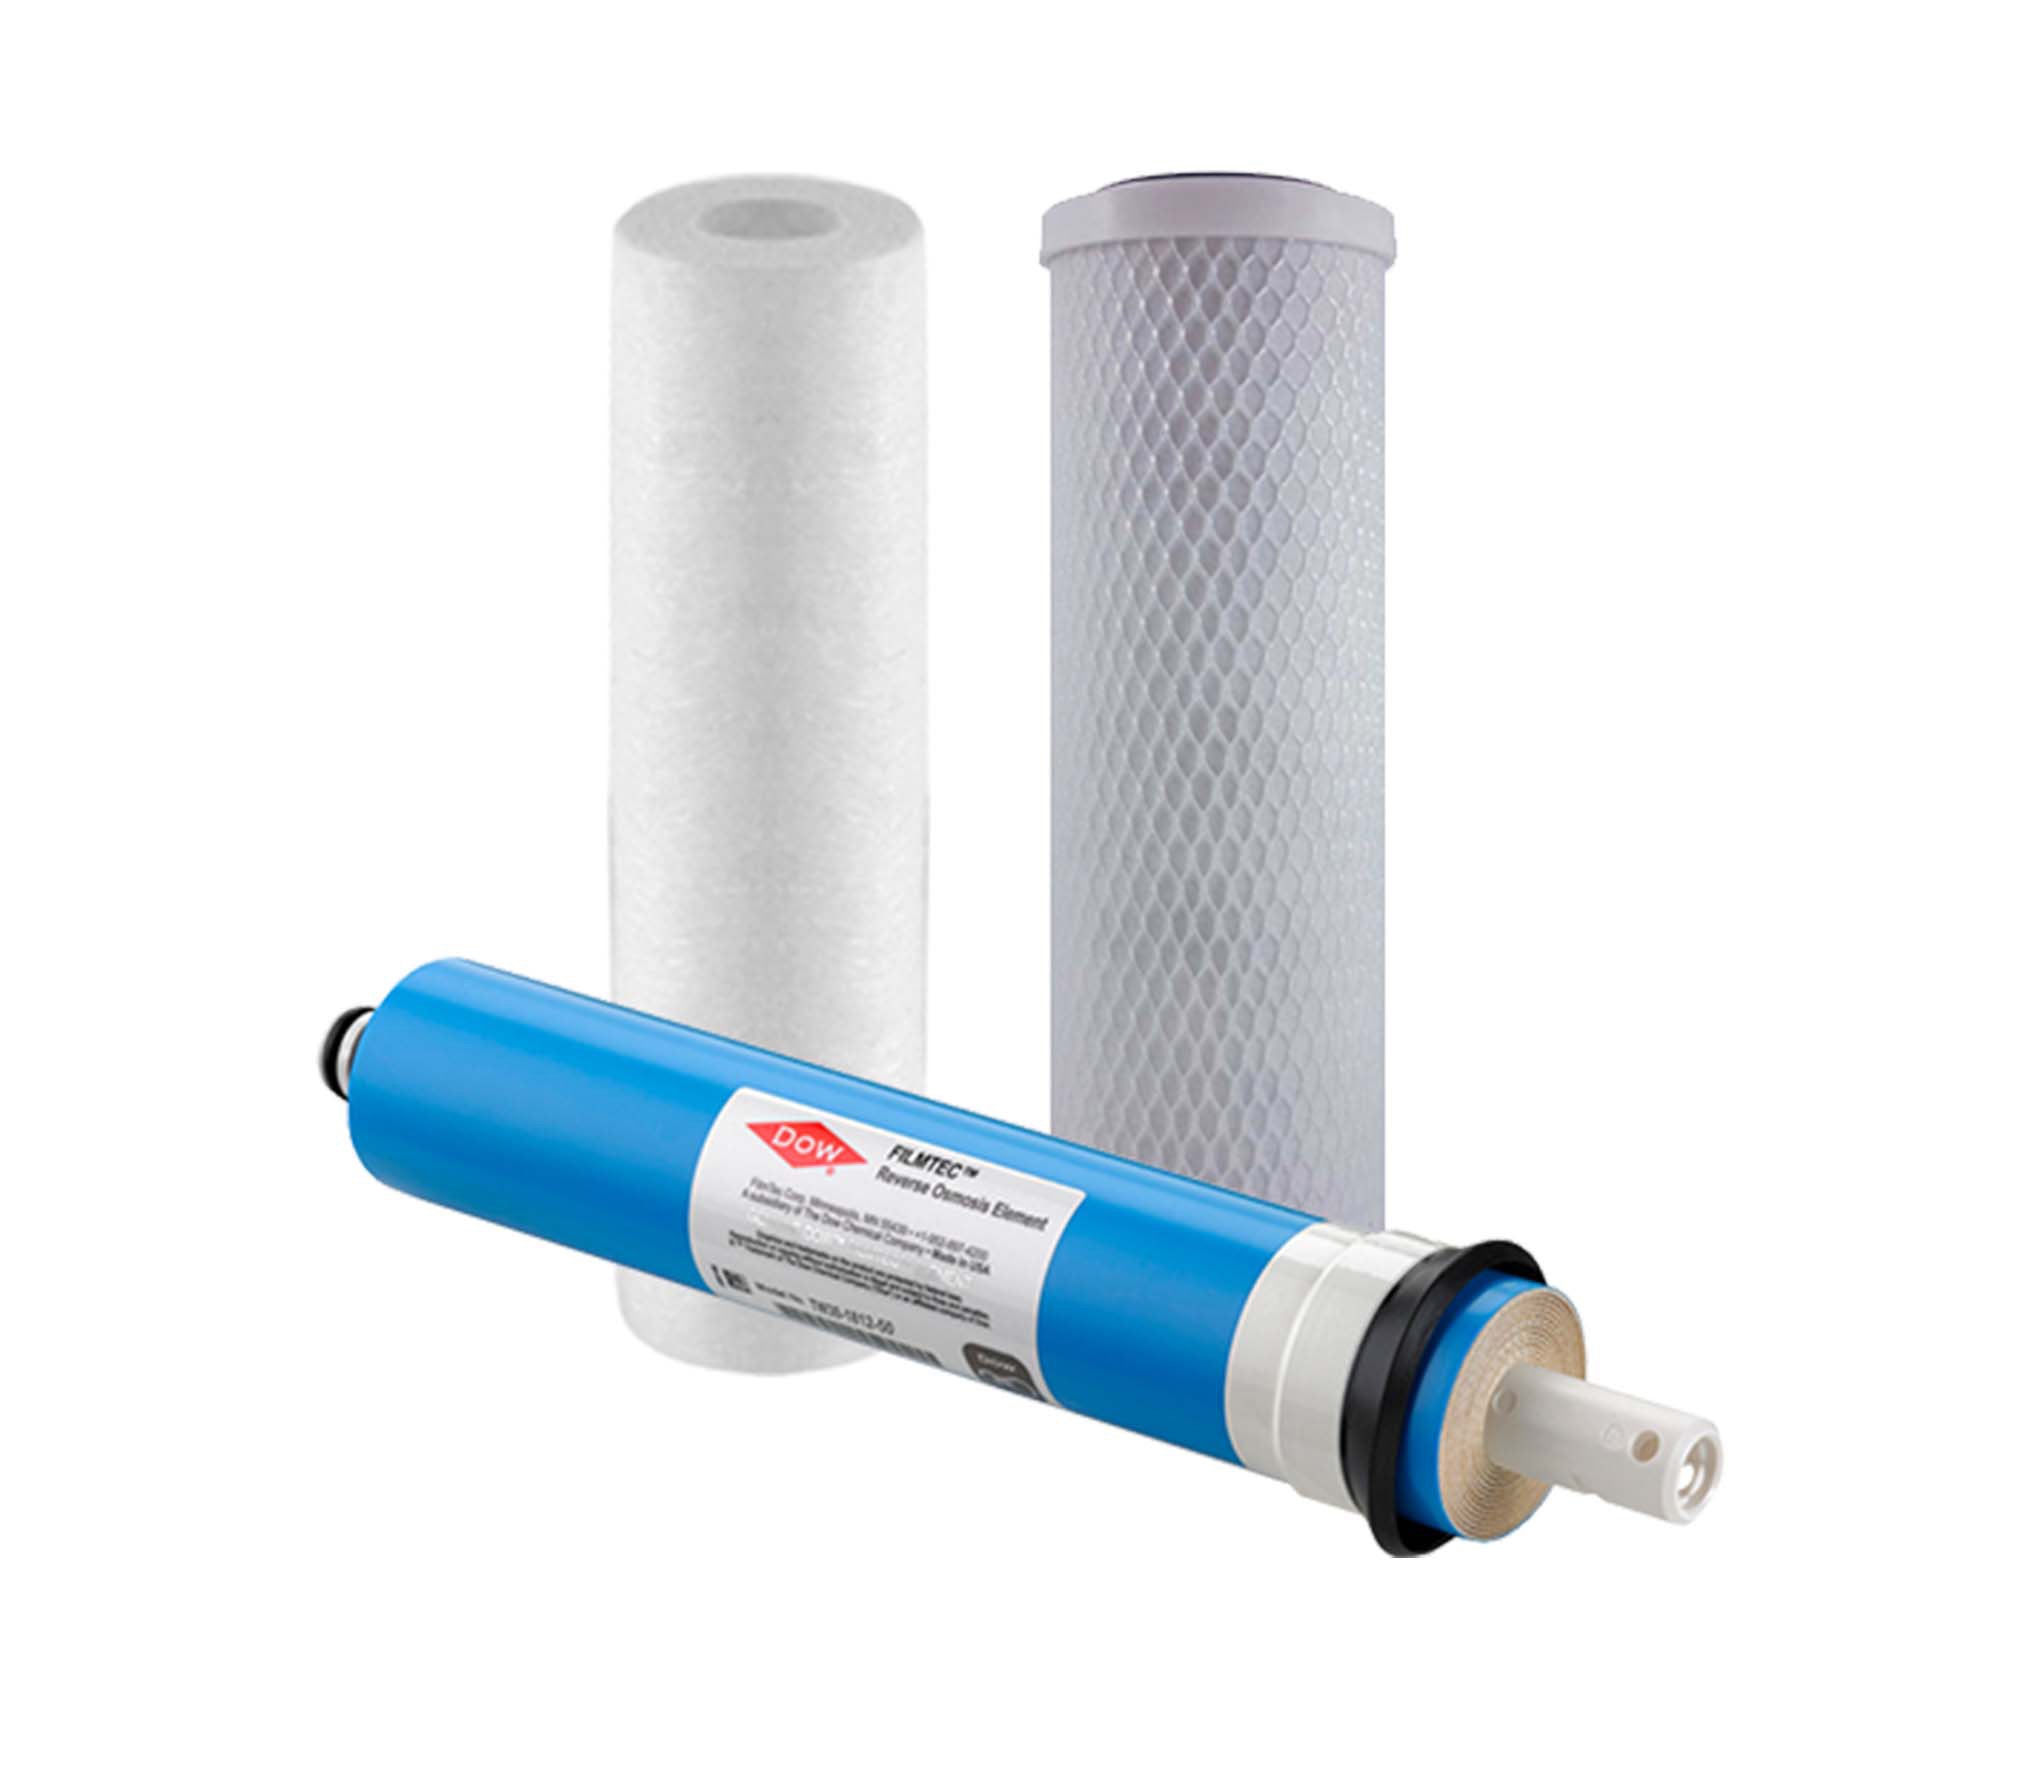 Reo-Pure 3 Stage Water Filter Set | Reverse Osmosis Filter Set | Reo Pure 3 Stage Filter